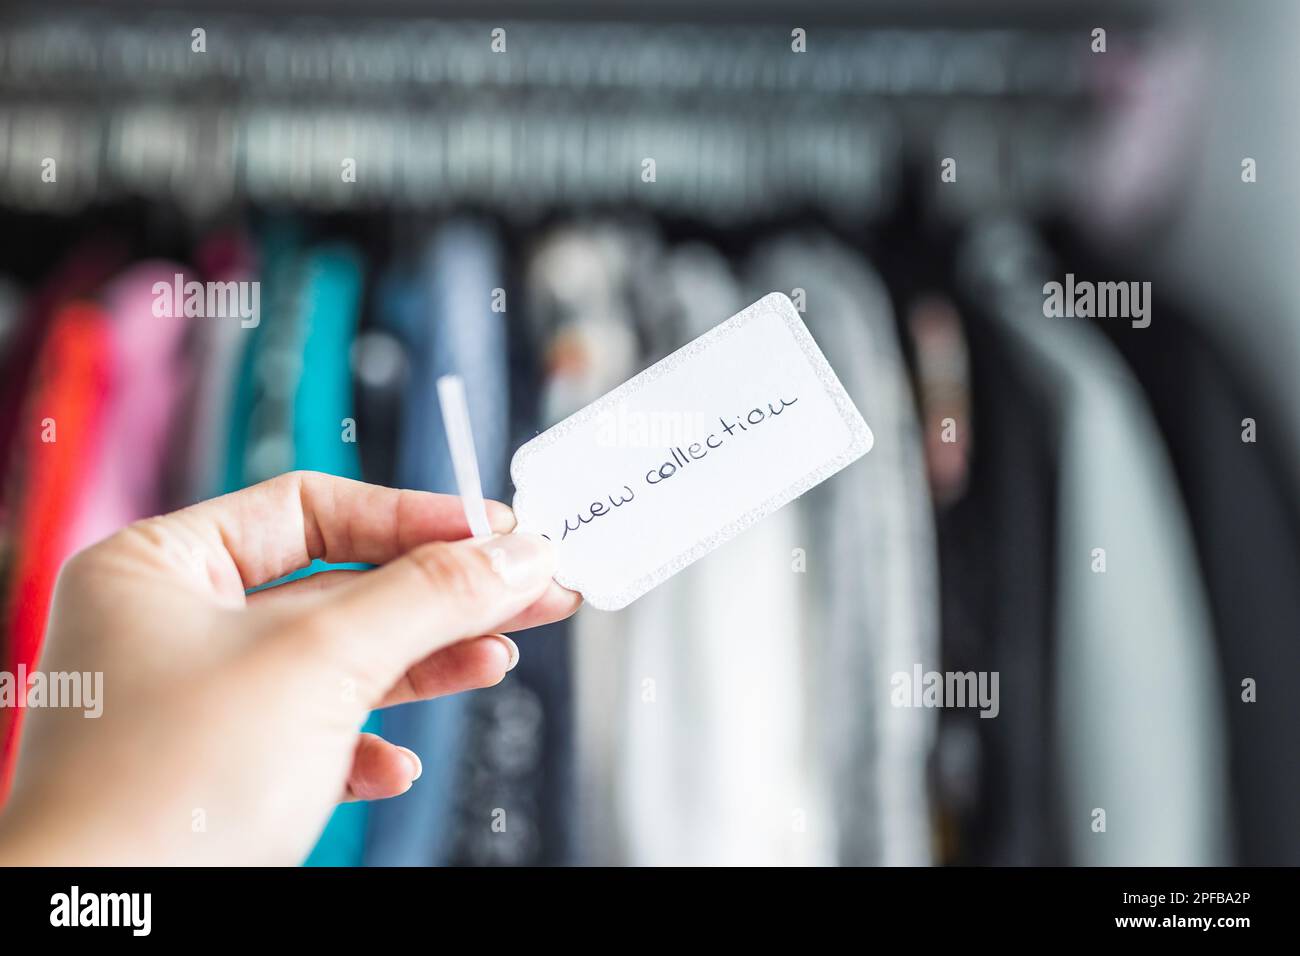 New Collection sign held in front of rack full of clothes, concept of fashion brands and competition Stock Photo